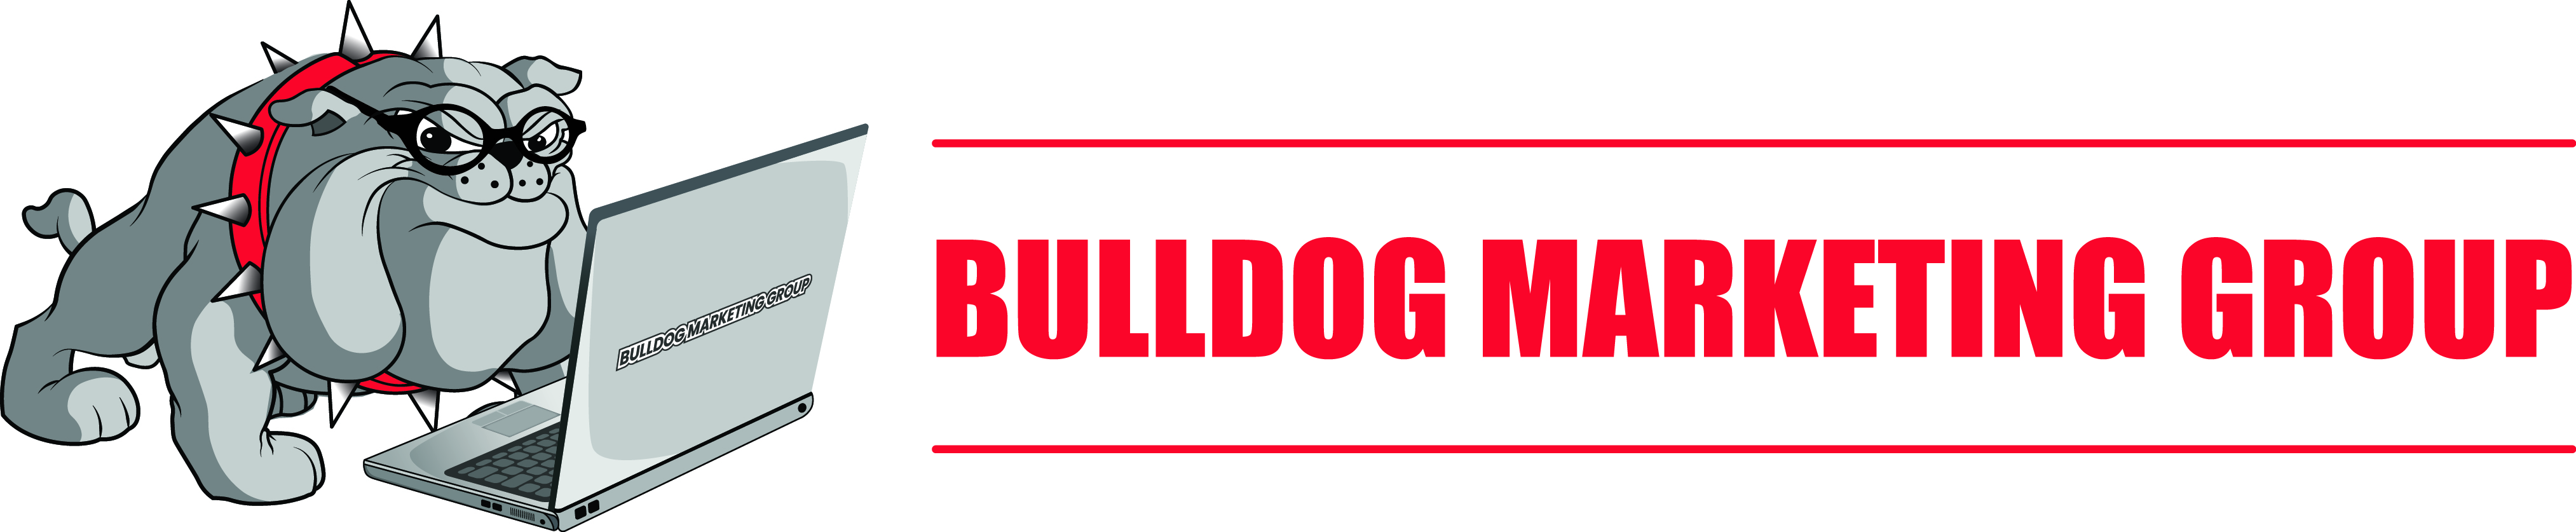 LeakTronics Launches Bulldog Marketing Group: A Specialized Agency Catering to Swimming Pool and Plumbing Businesses' Online Presence